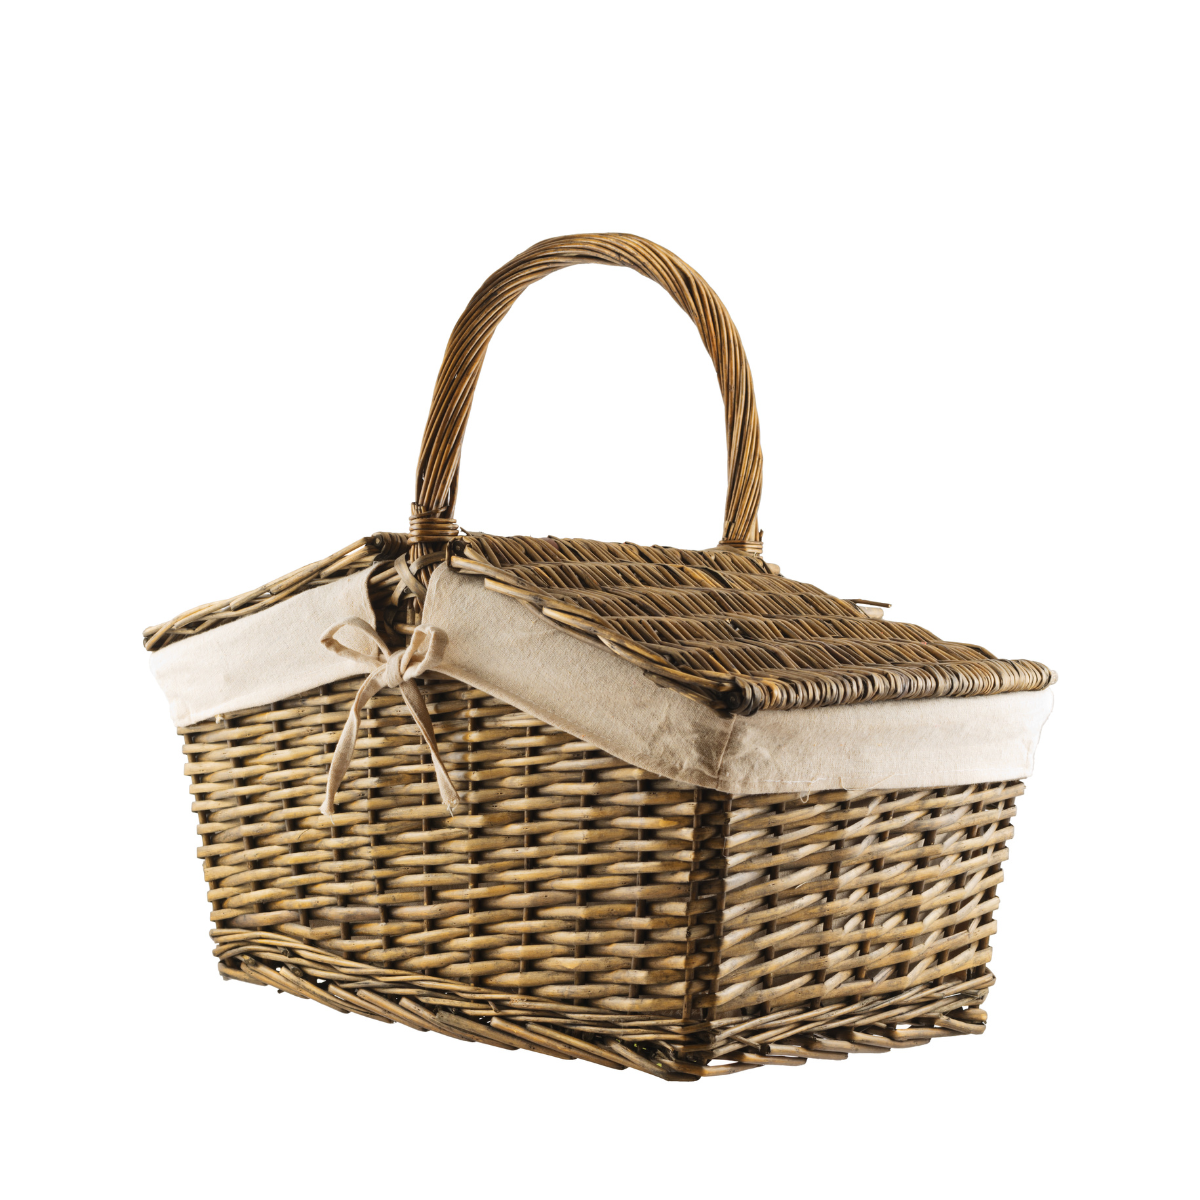 23. Create Lasting Memories with a Personalized Weekend Picnic Basket, the Perfect Anniversary Gift Idea